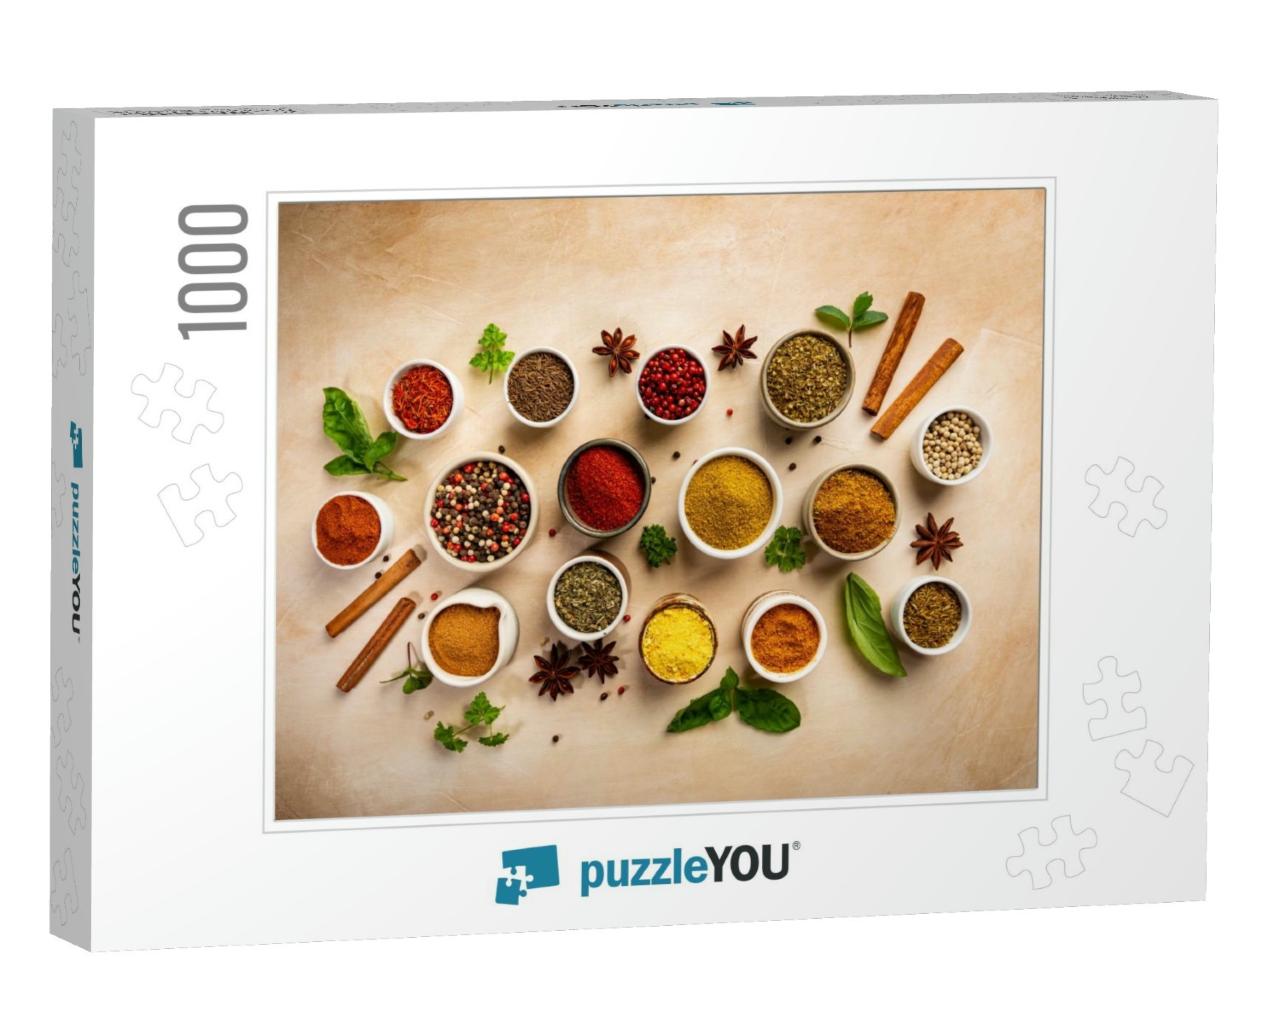 Herbs & Spices in Bowels Over Light Background. Top View... Jigsaw Puzzle with 1000 pieces